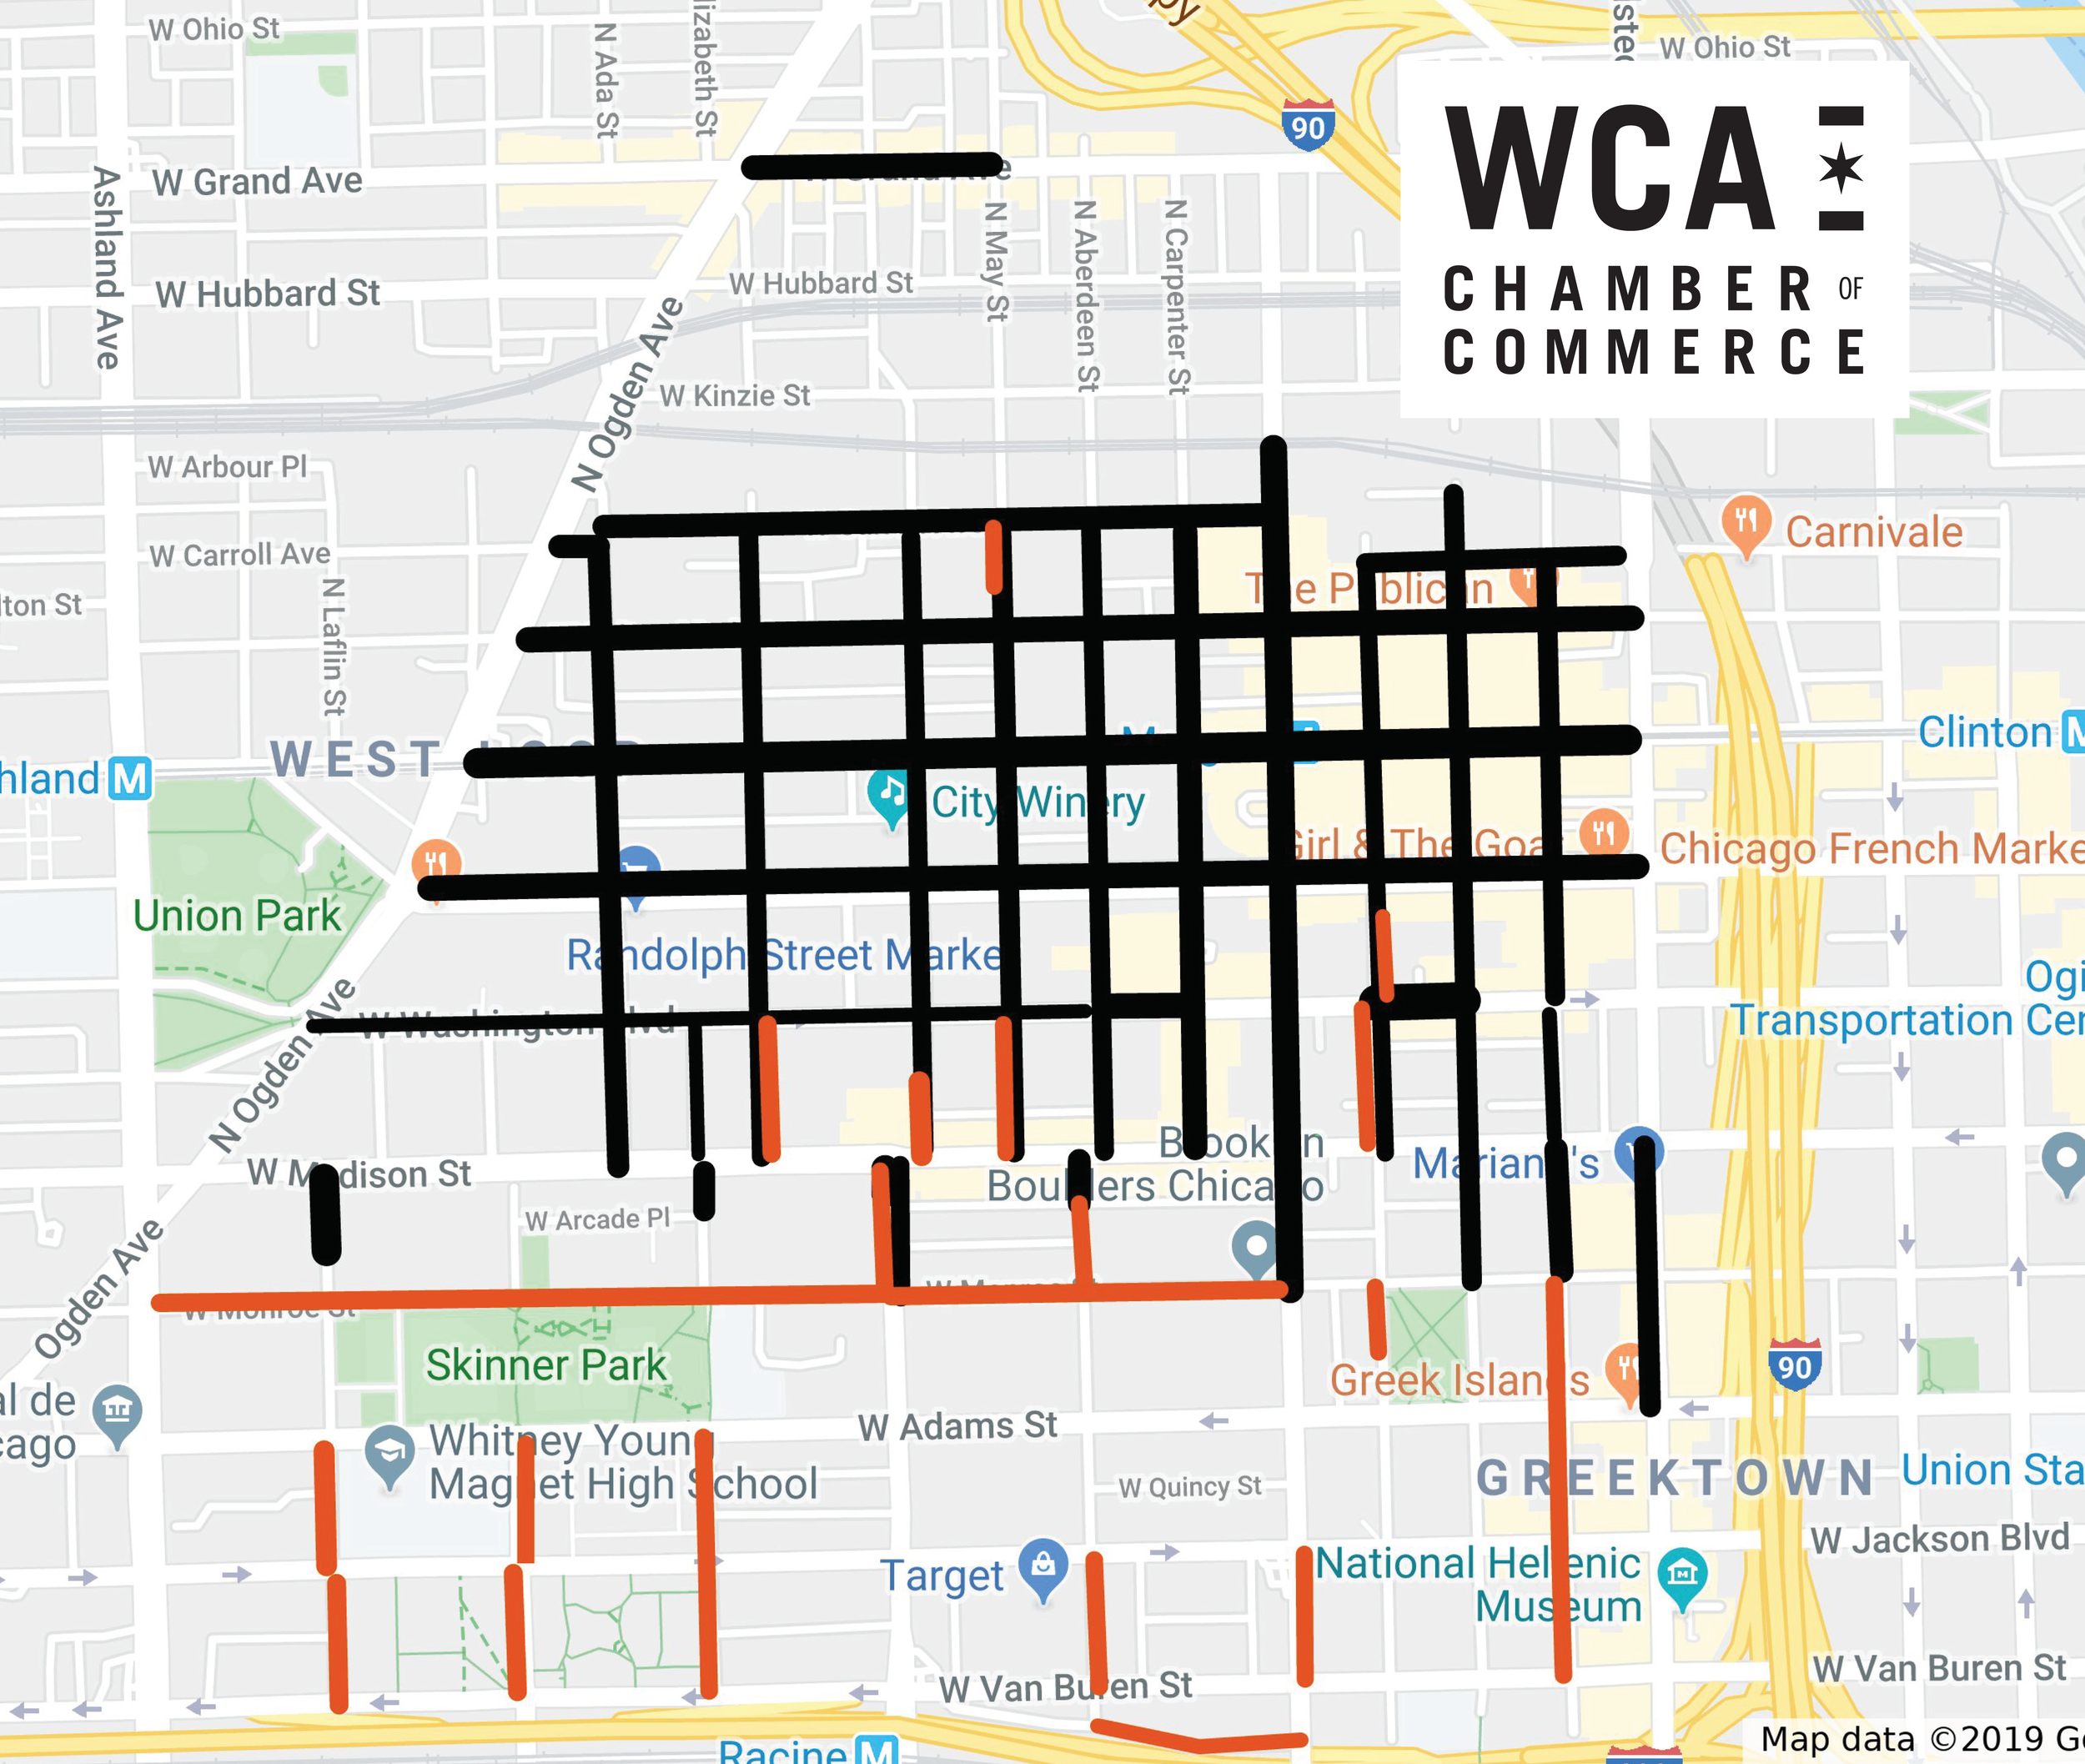 City of Chicago Passes New Meters and Residential Parking in the West Loop  — West Central Association - Chamber of Commerce